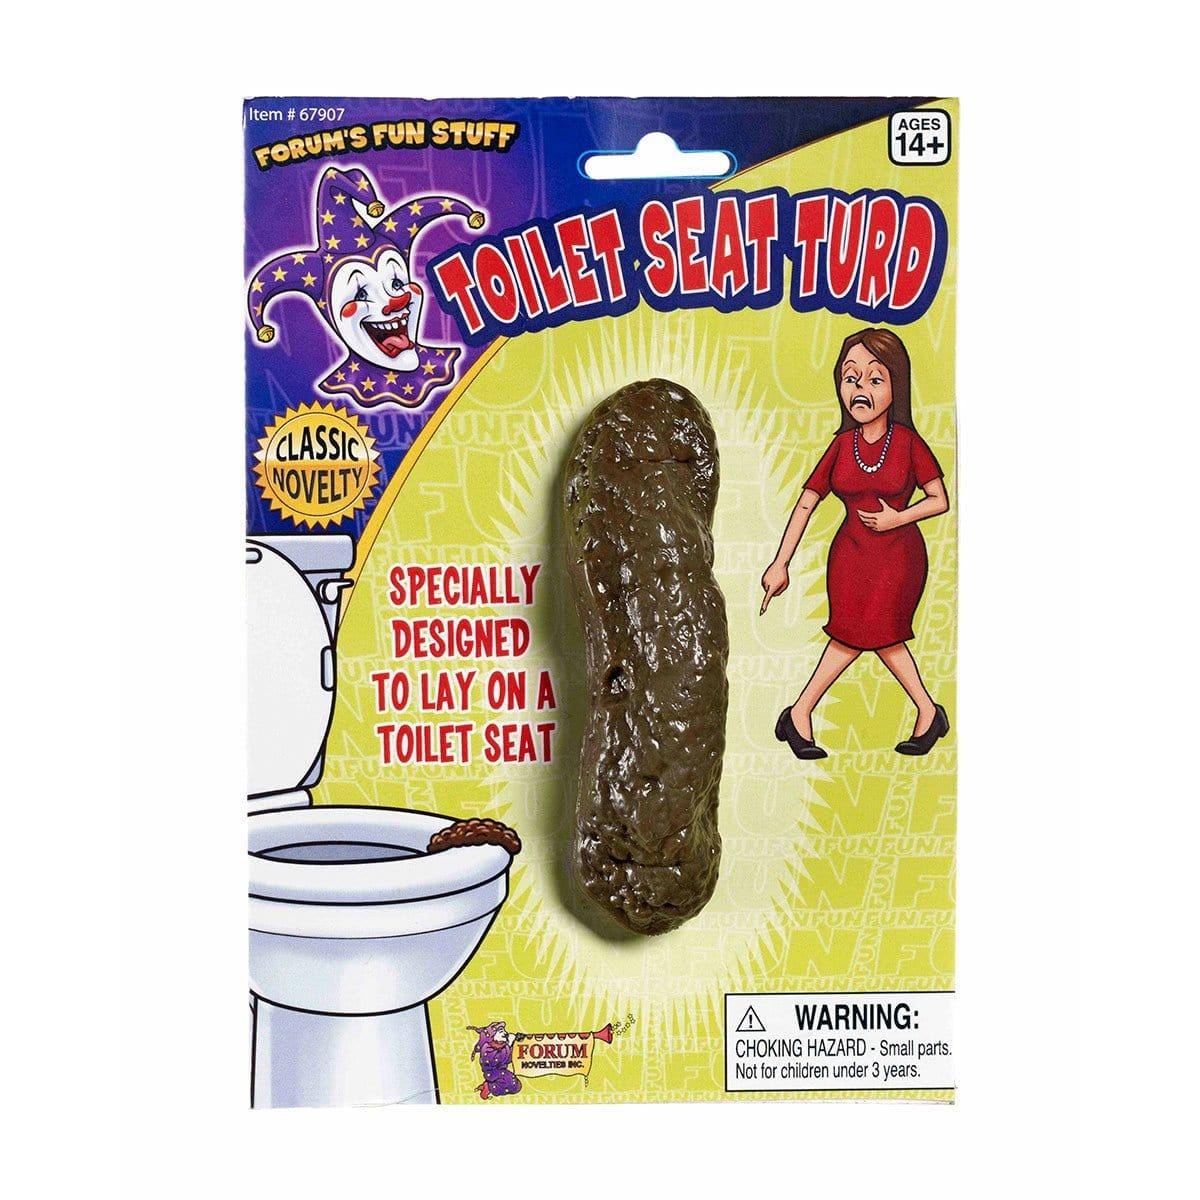 Buy Novelties Toilet Seat Turd sold at Party Expert